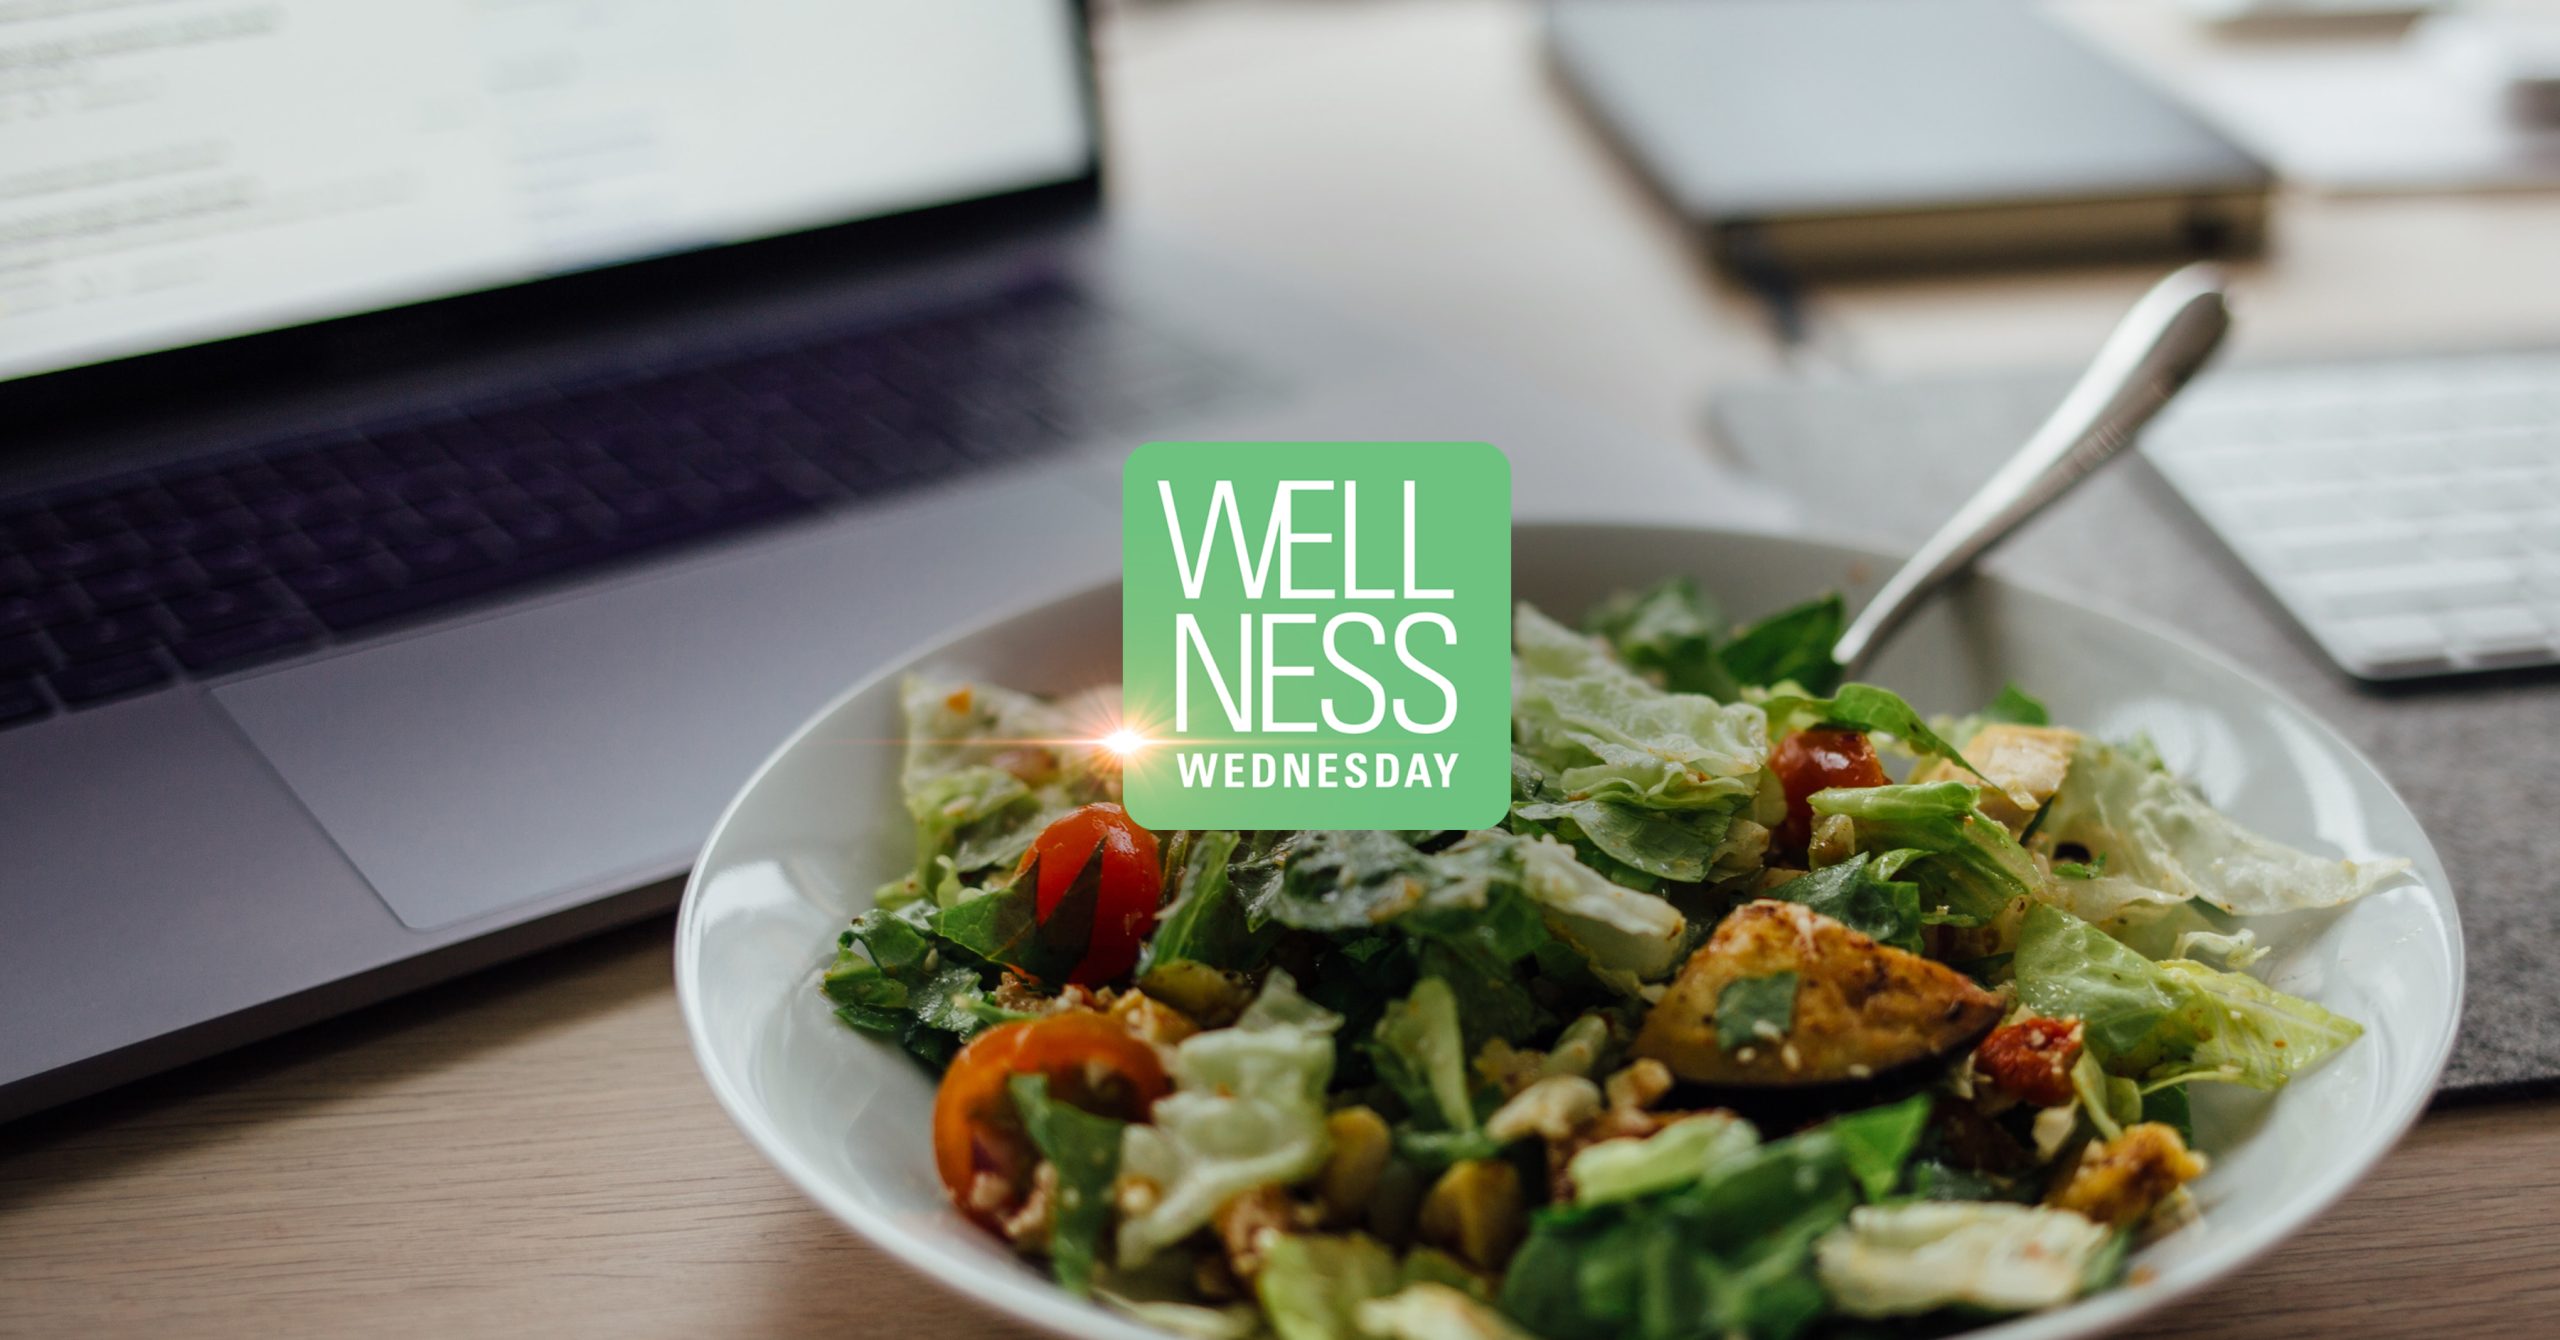 Wellness Wednesday: Five Nutritious & Delicious Ideas